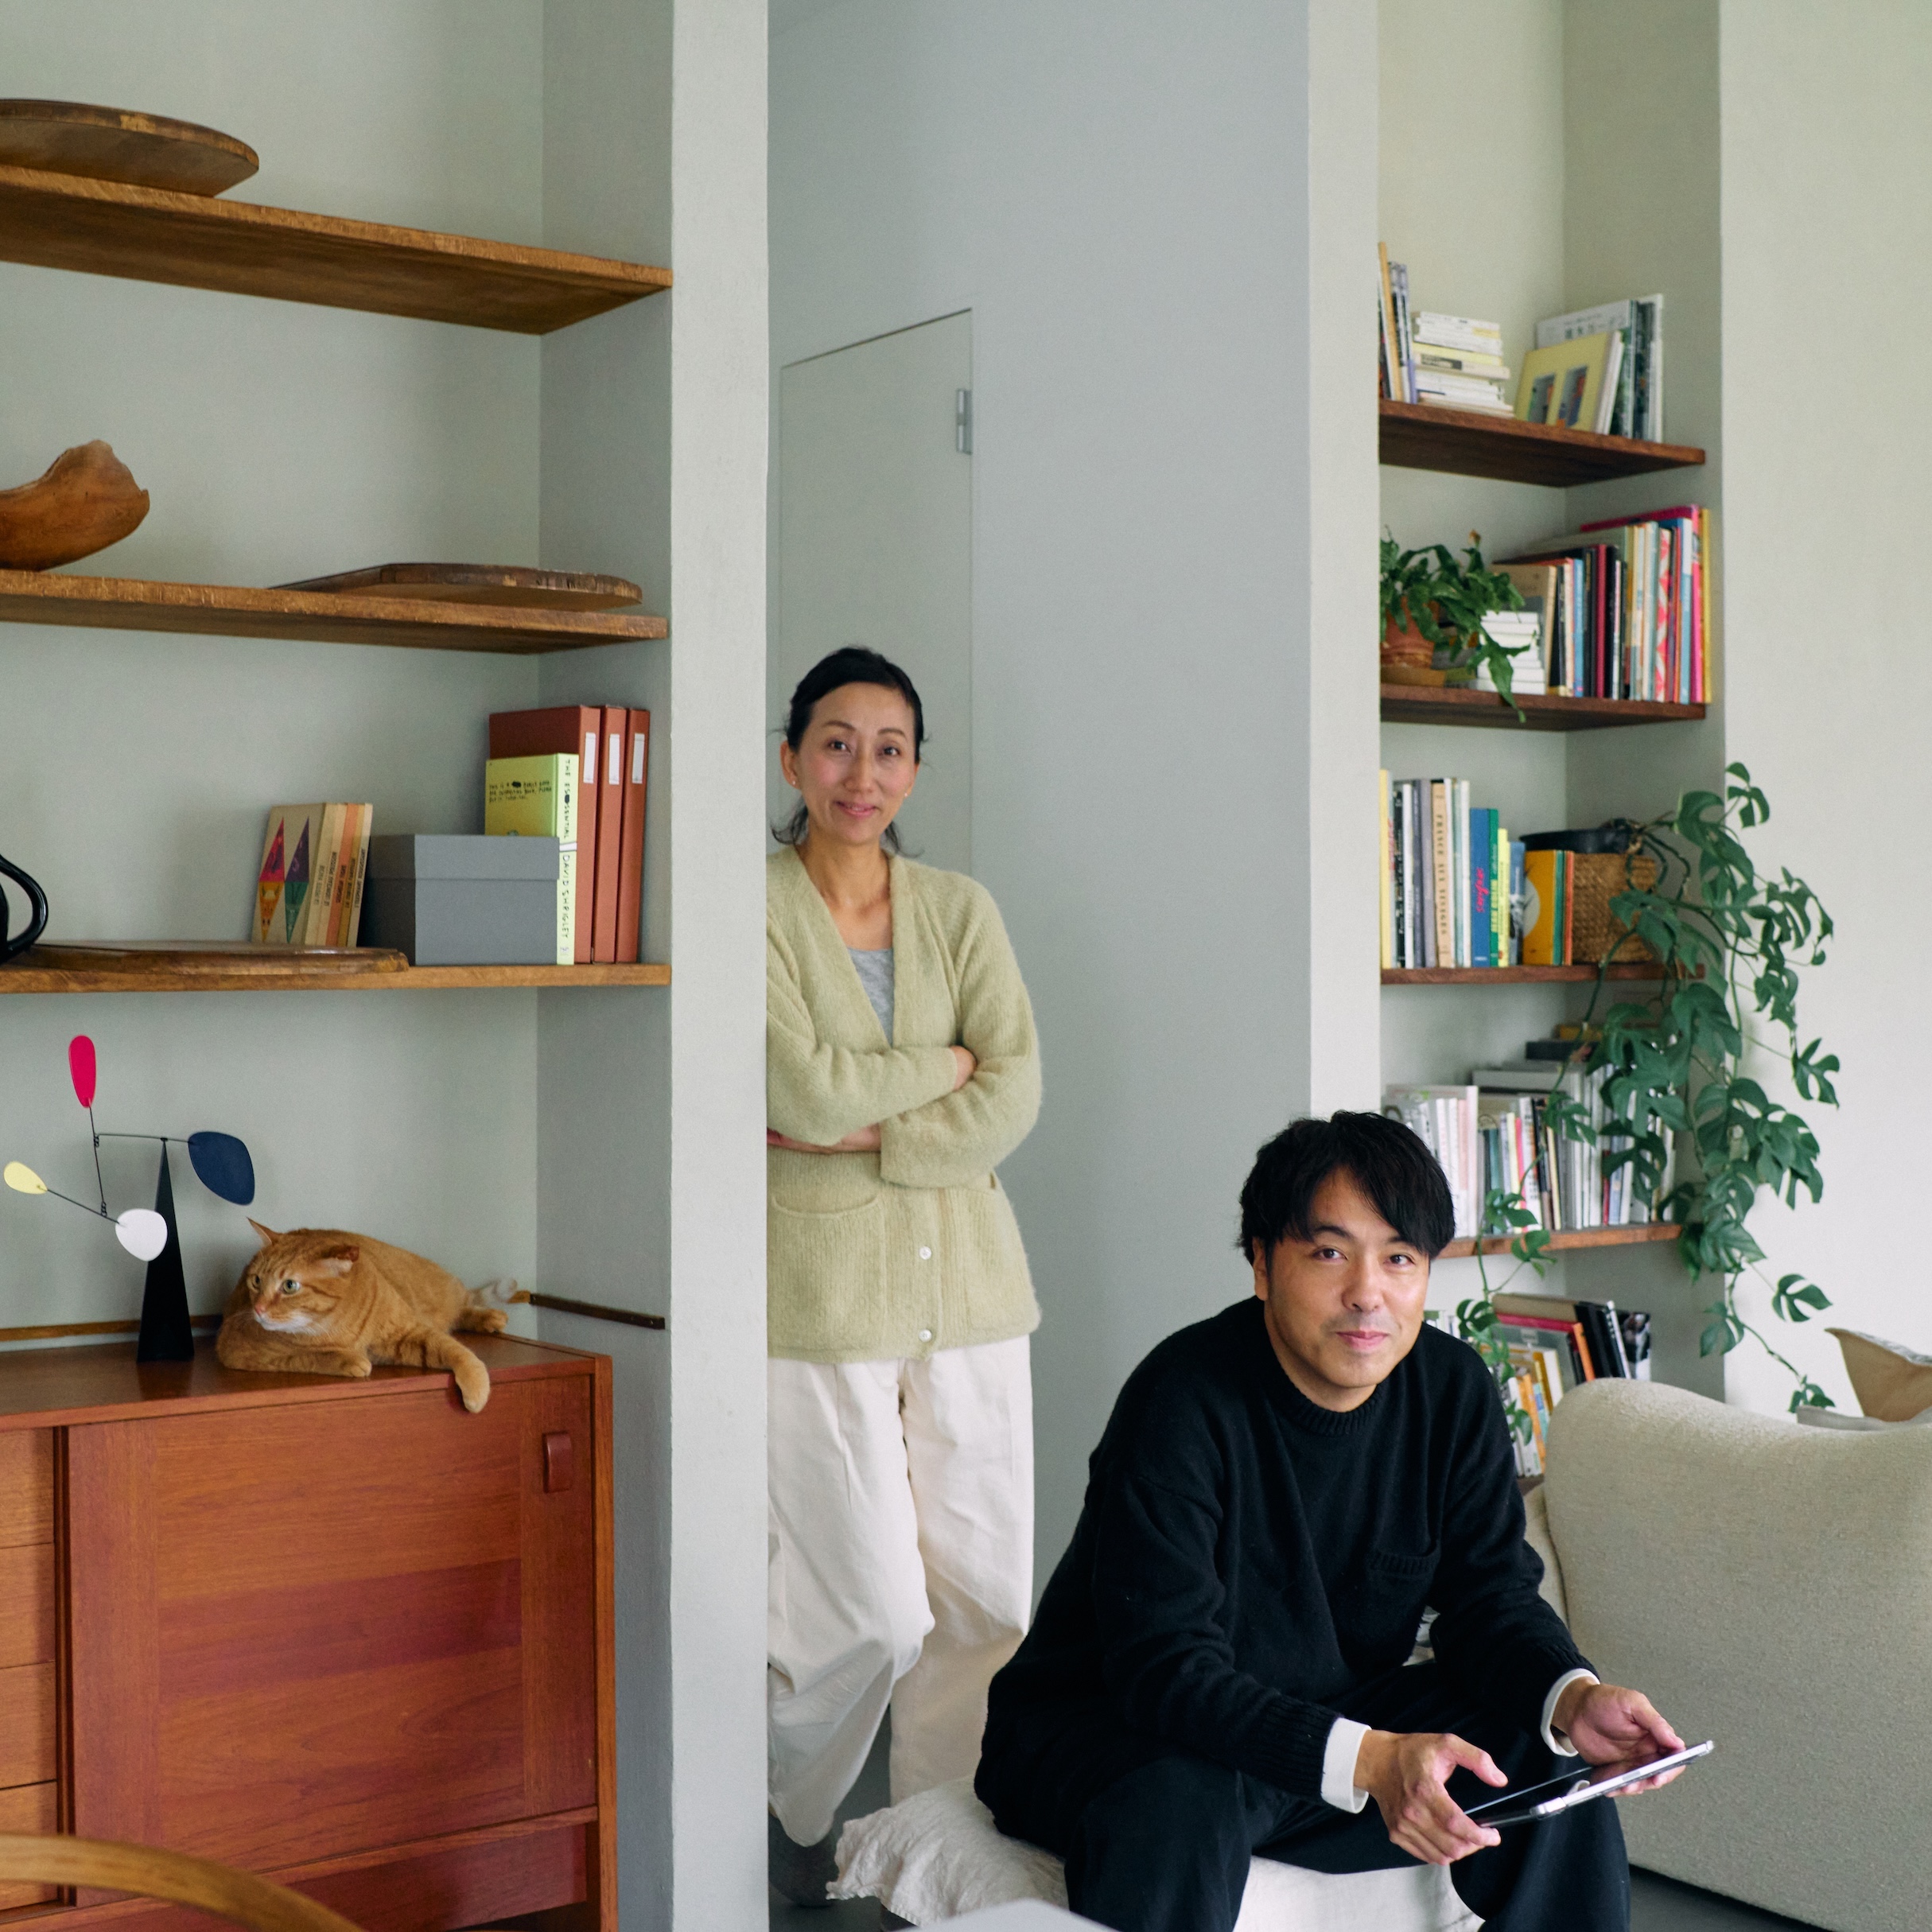 akira tani and kim hyunsook at home in the house they designed in tokyo. 325